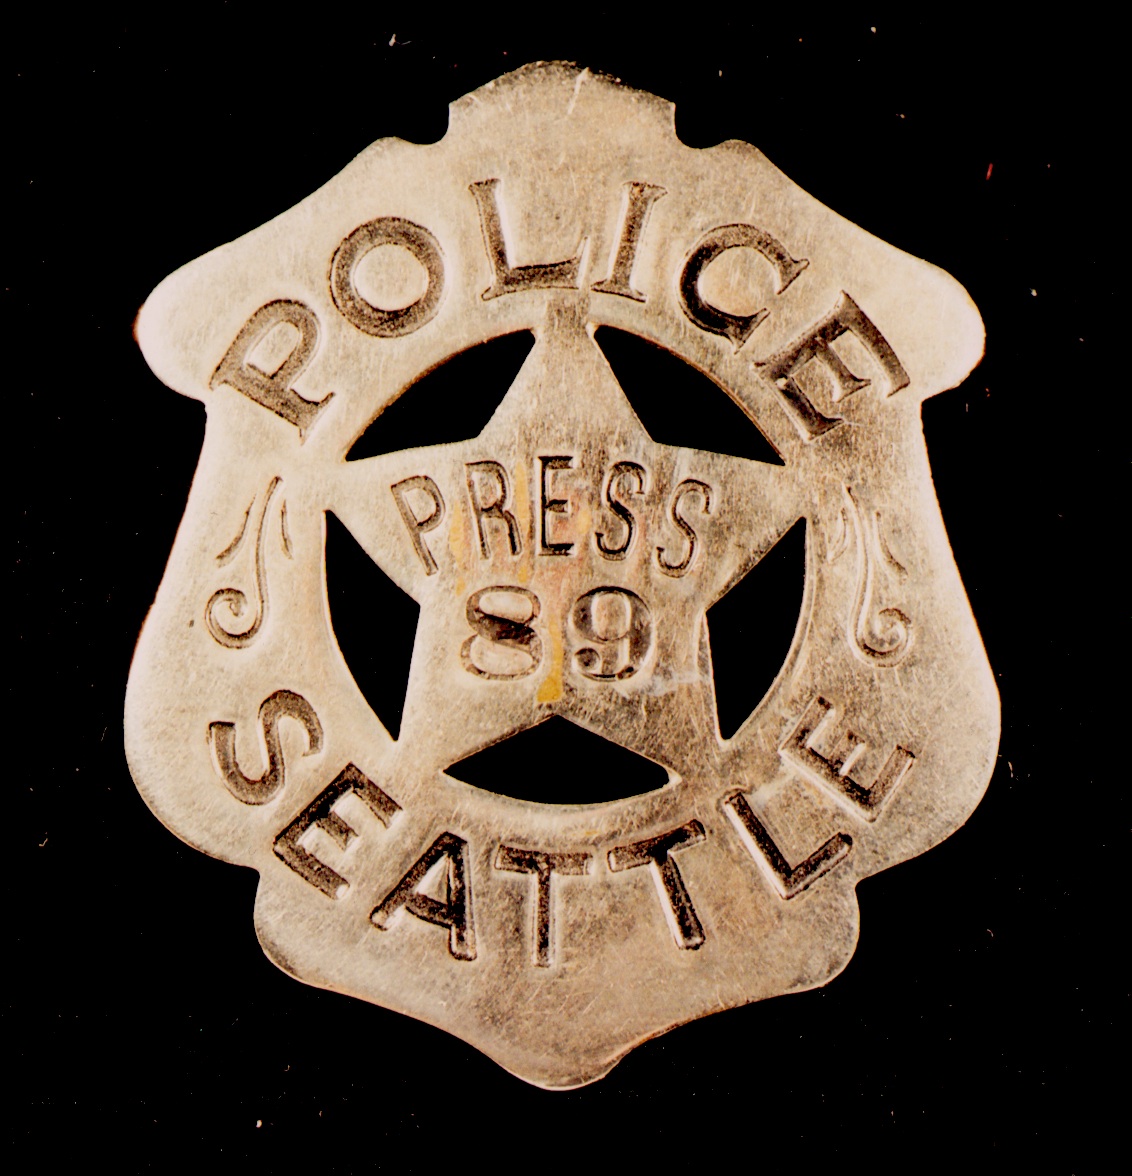 seattle police badge